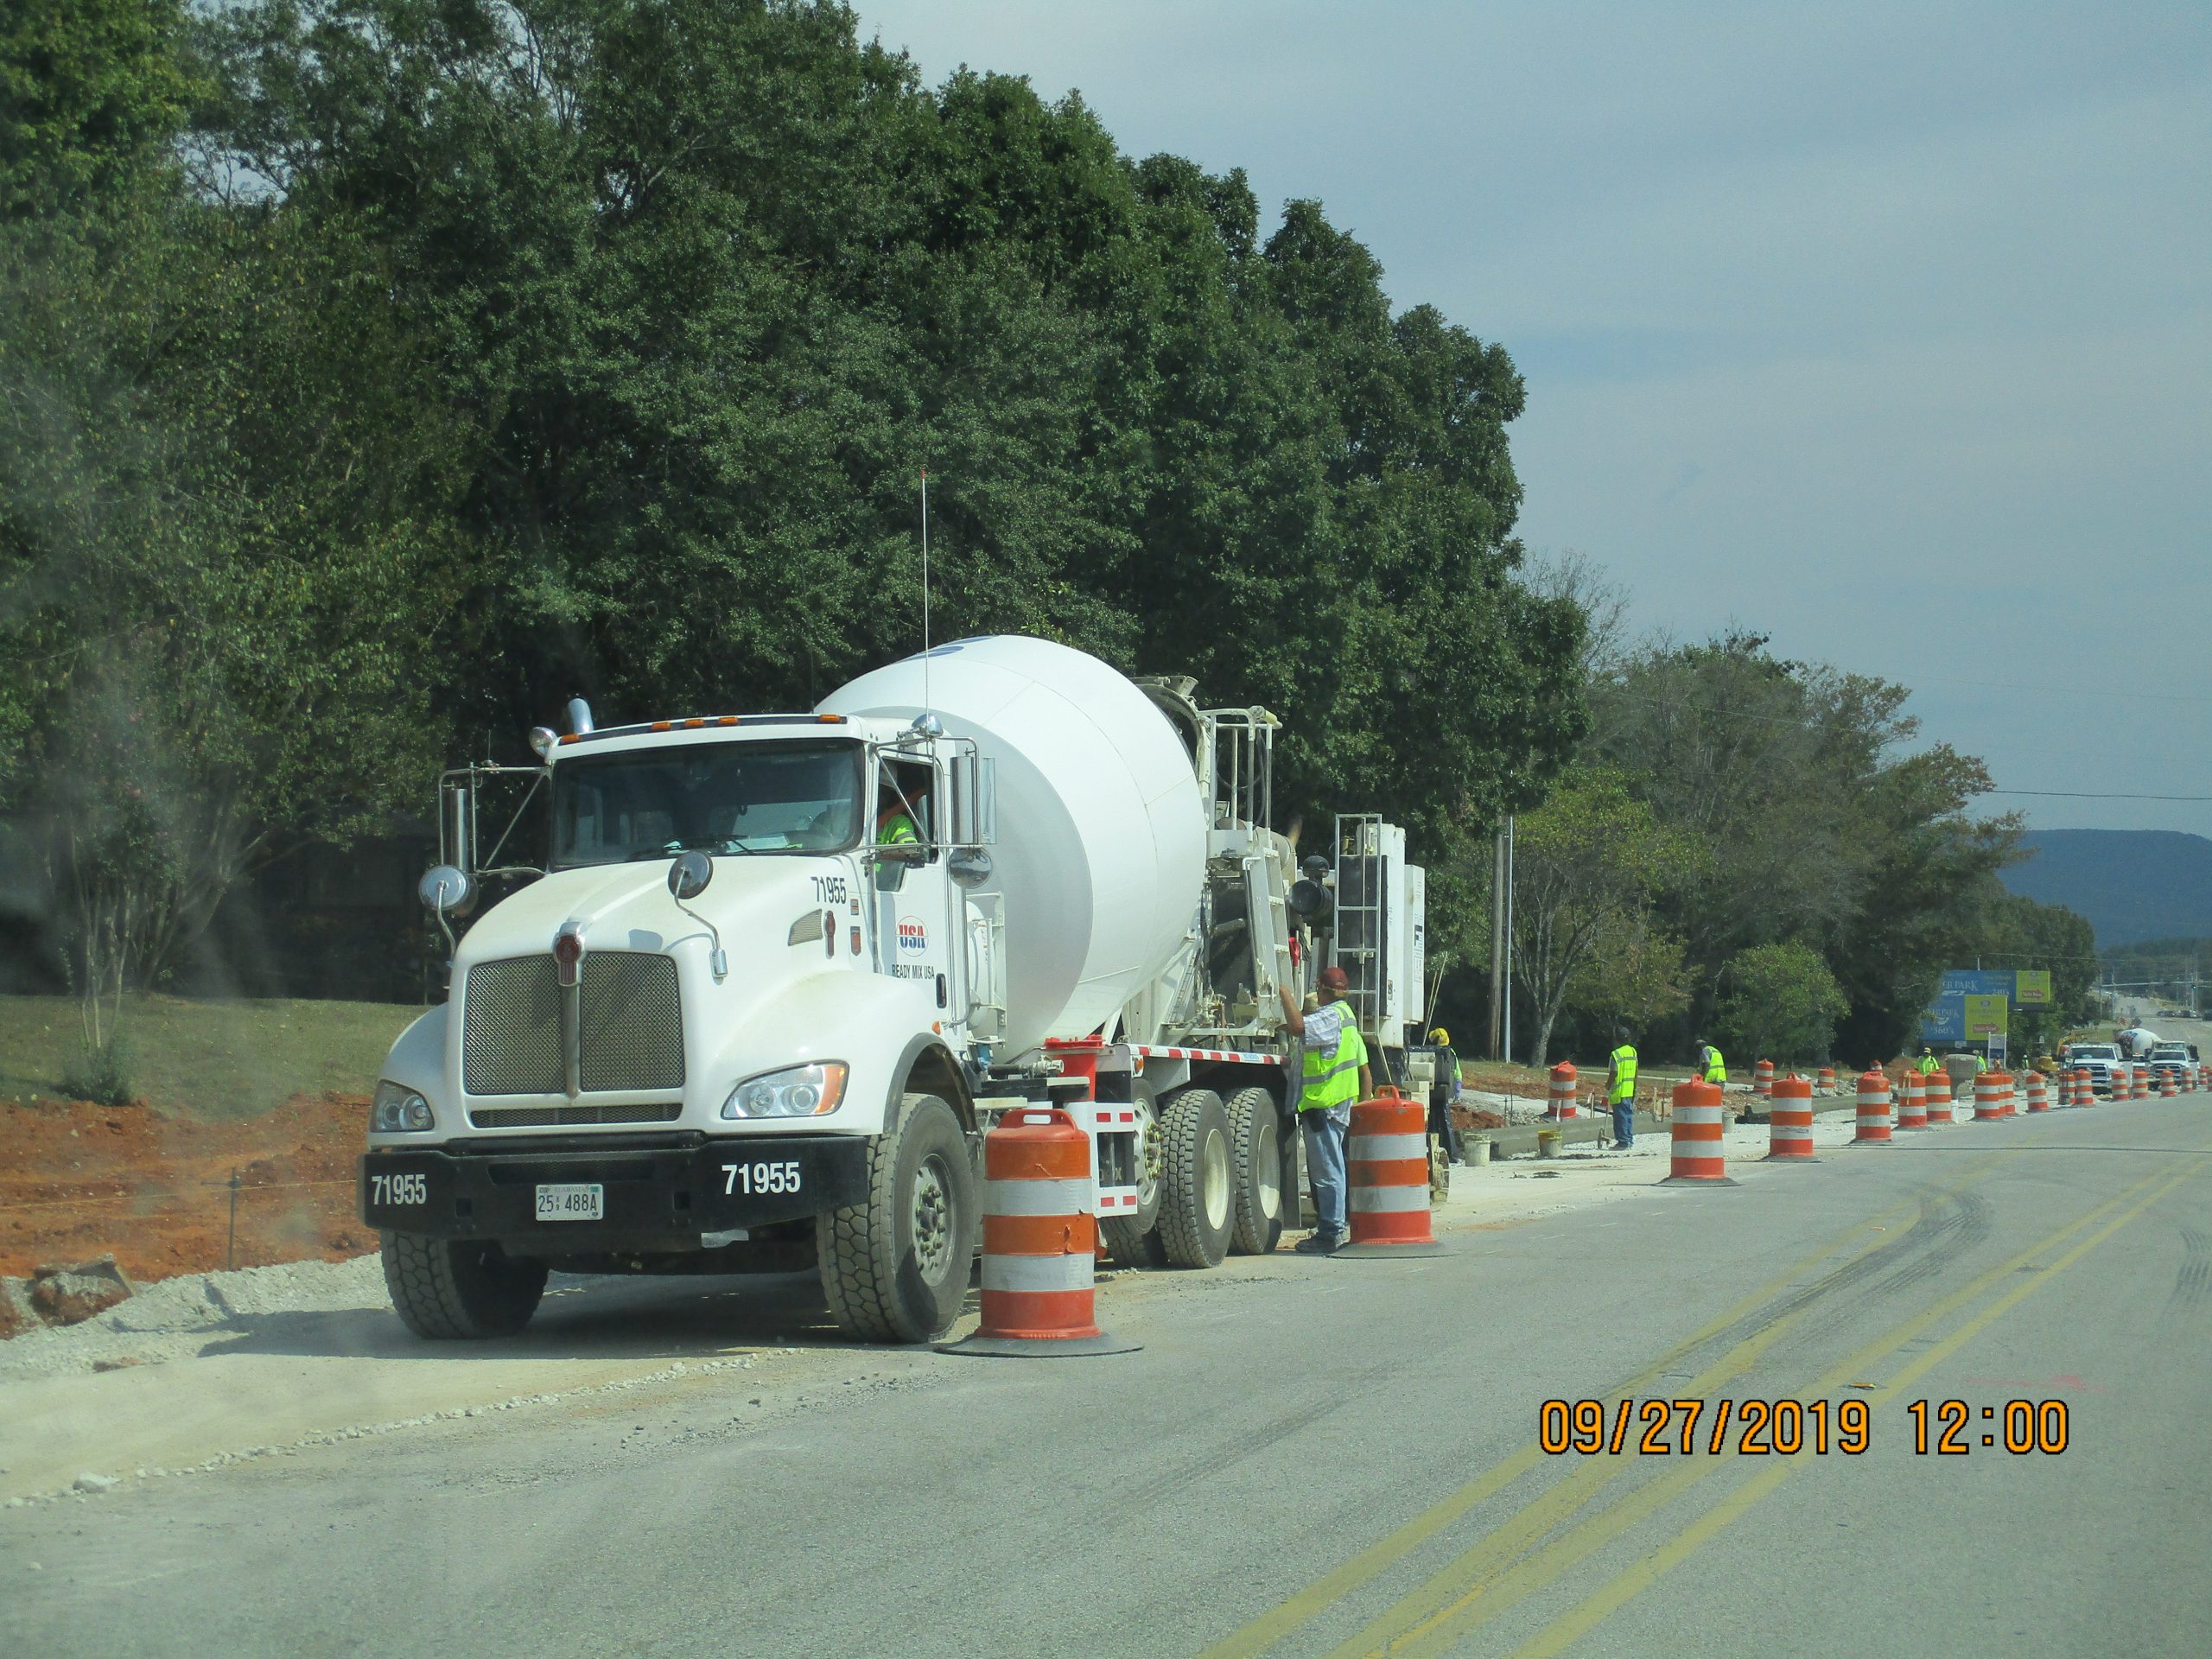 Paving with truck, cones, and construction workers on Cecil Ashburn Road